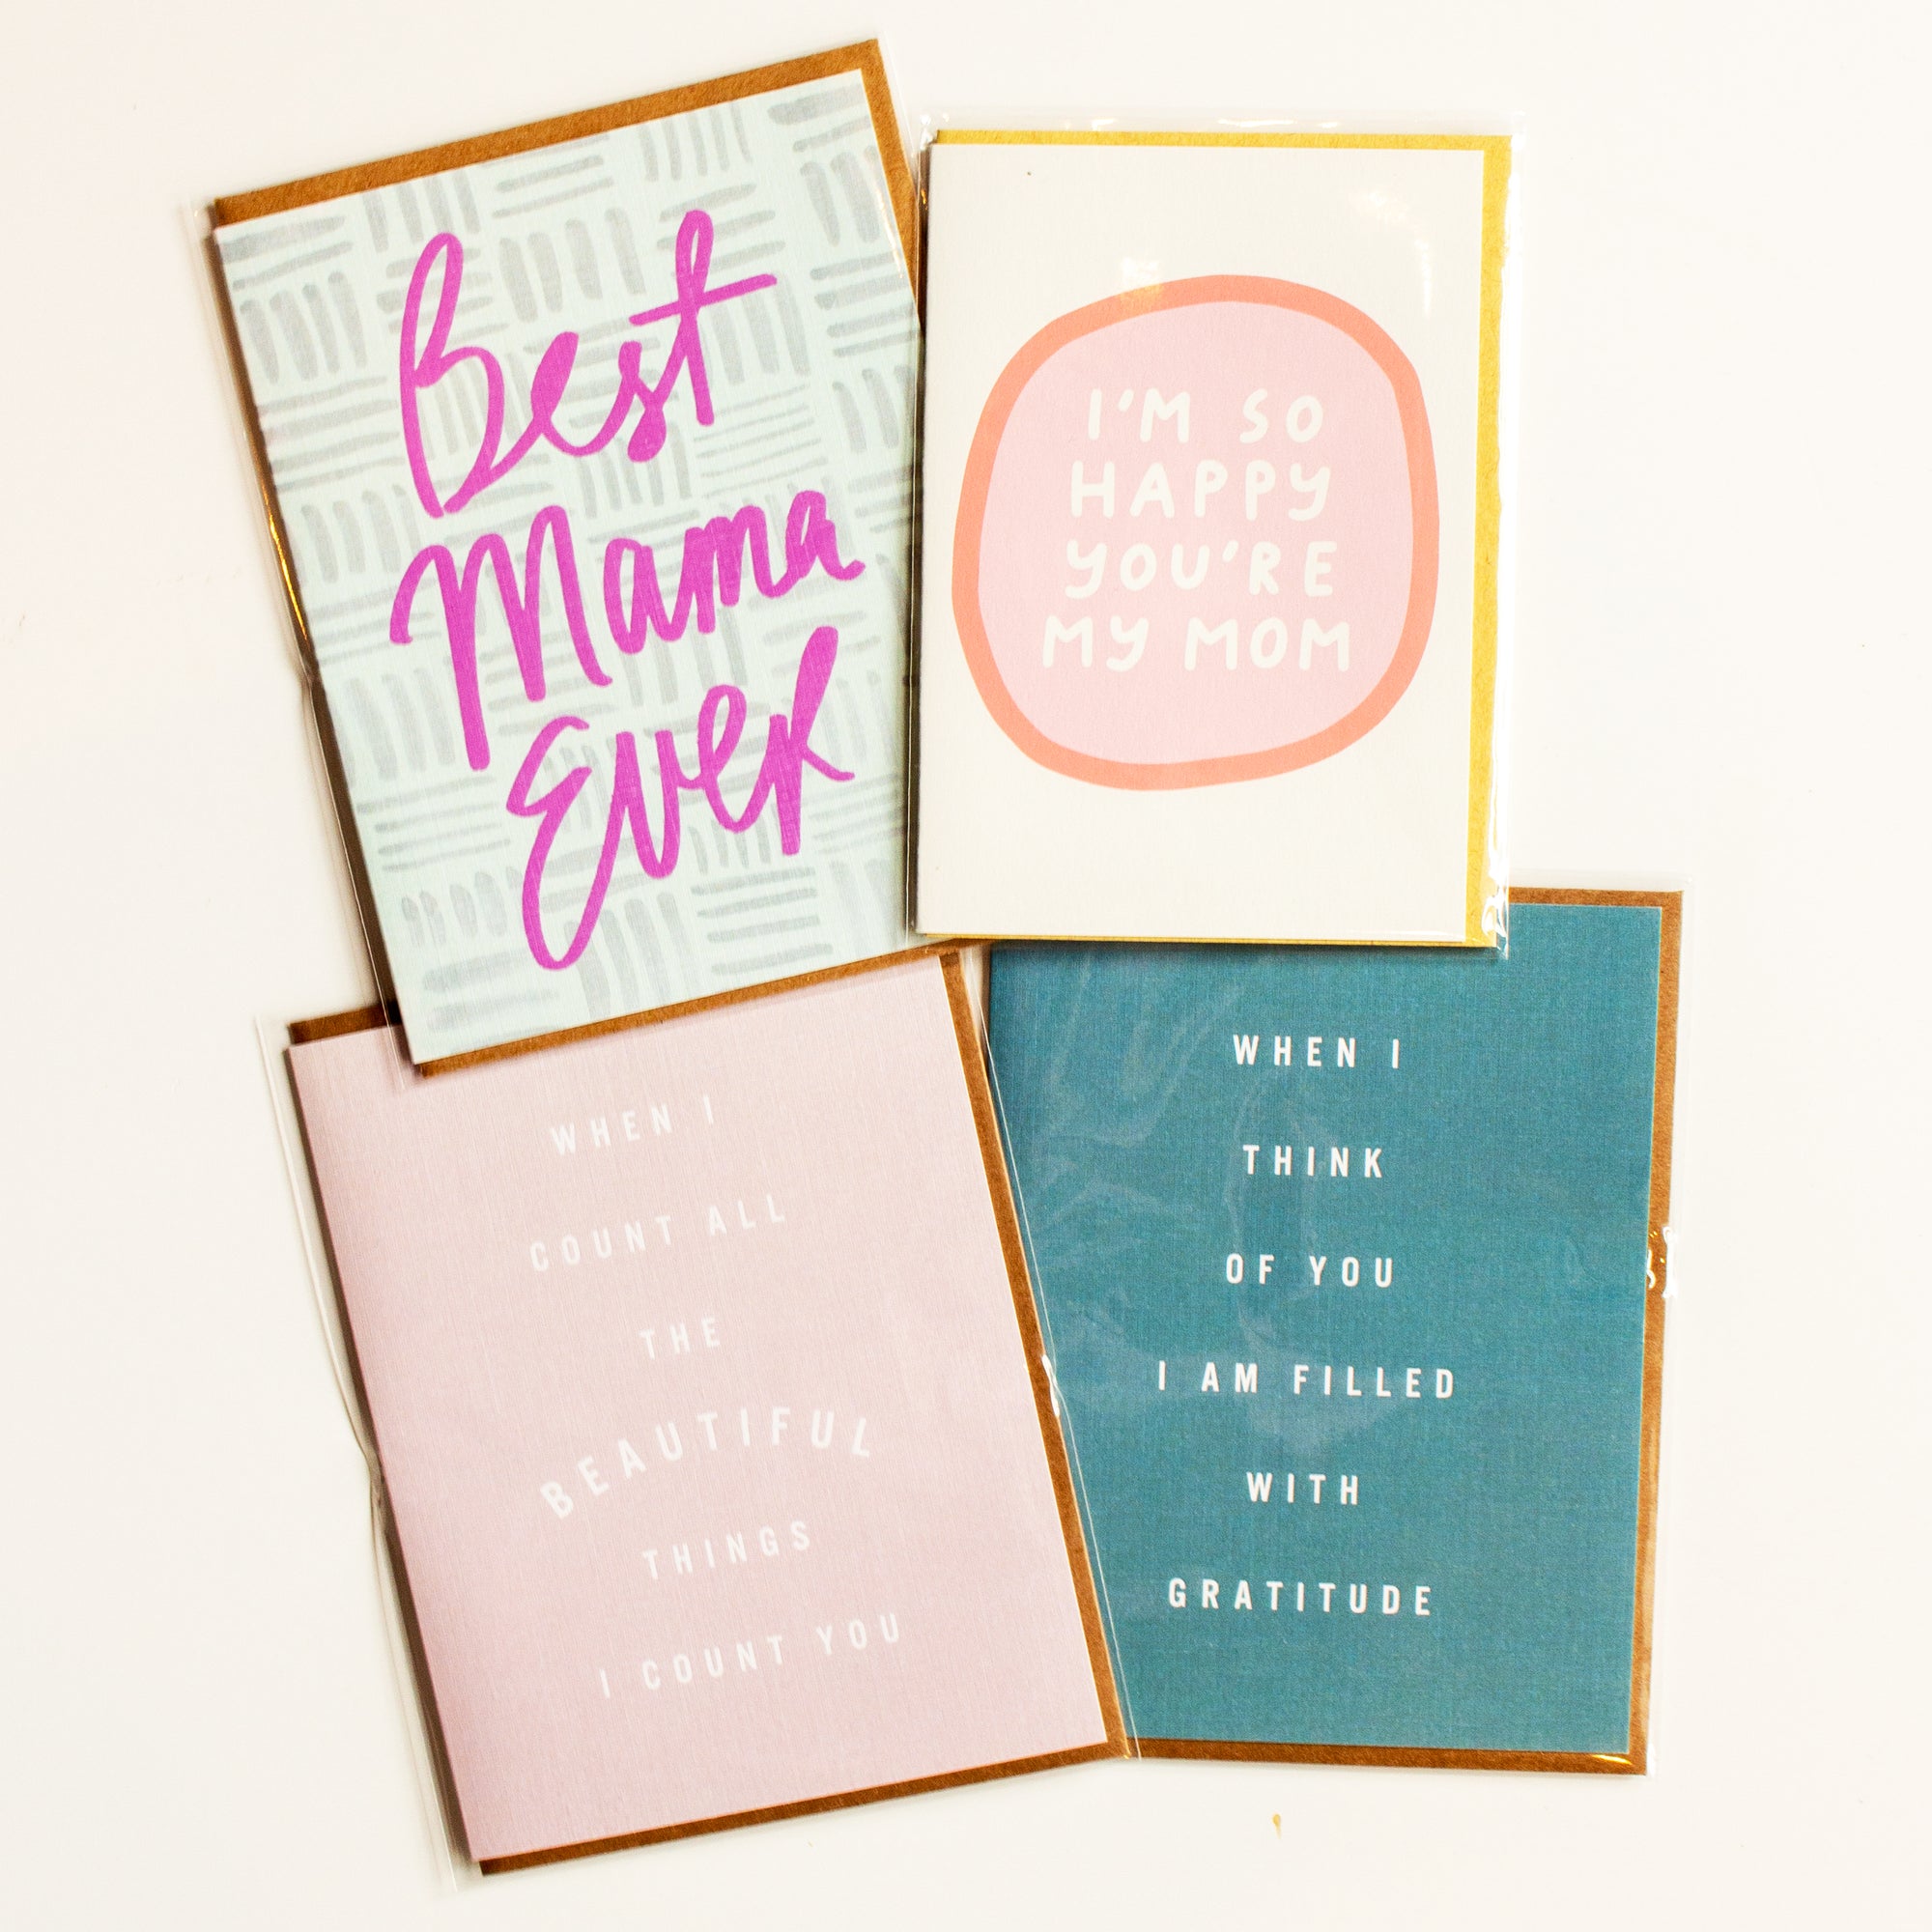 Send Local Love to Mom This Year